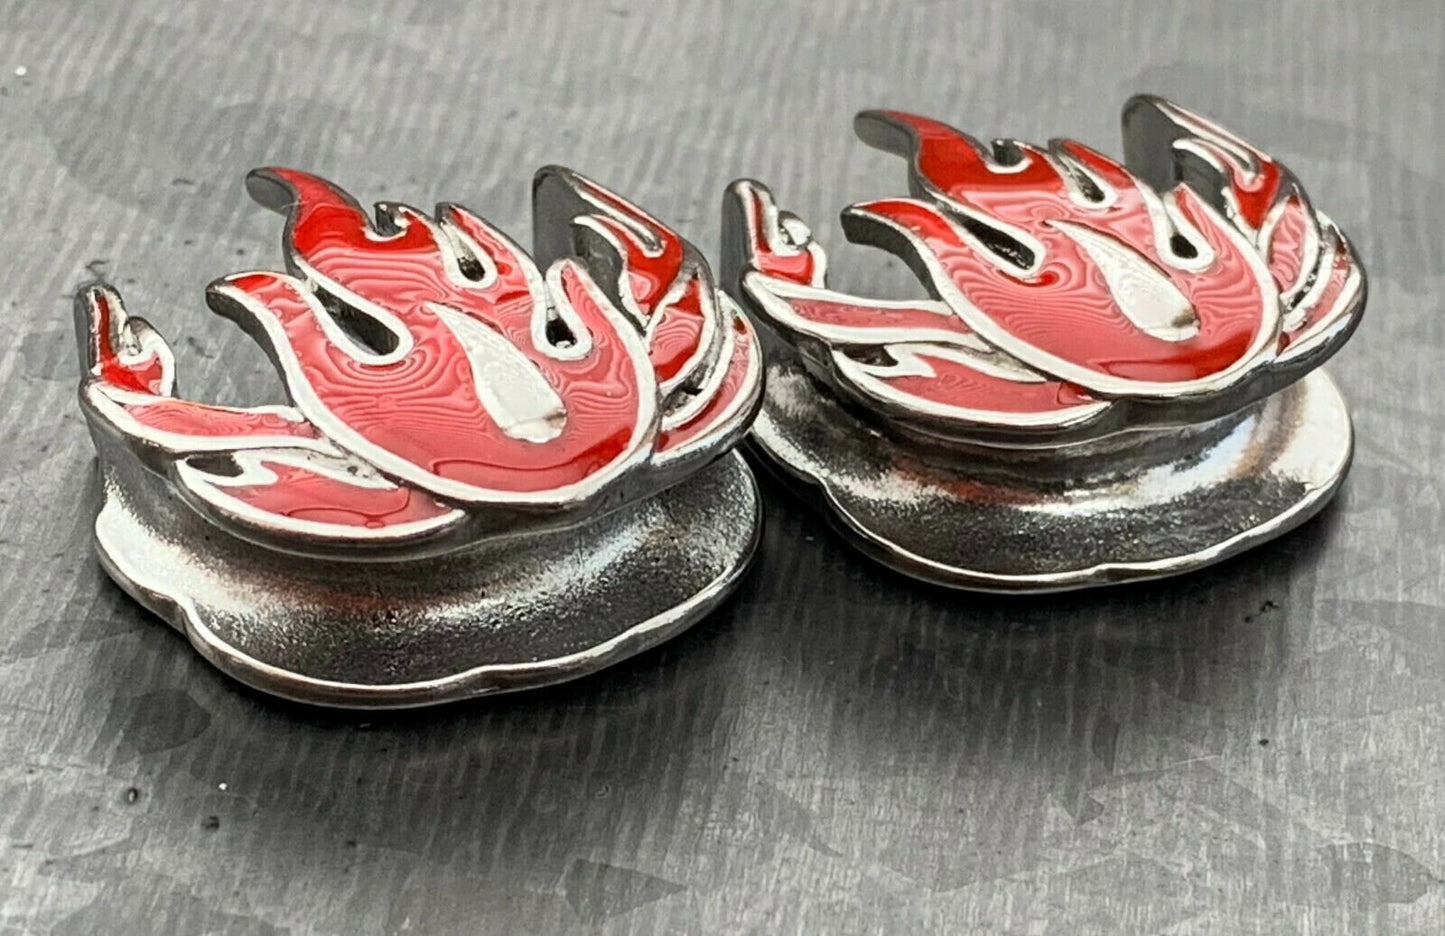 PAIR of Unique Red Flames Steel Saddle Ear Spreader Tunnels/Plugs - Gauges 00g (10mm) thru 1" (25mm) available!